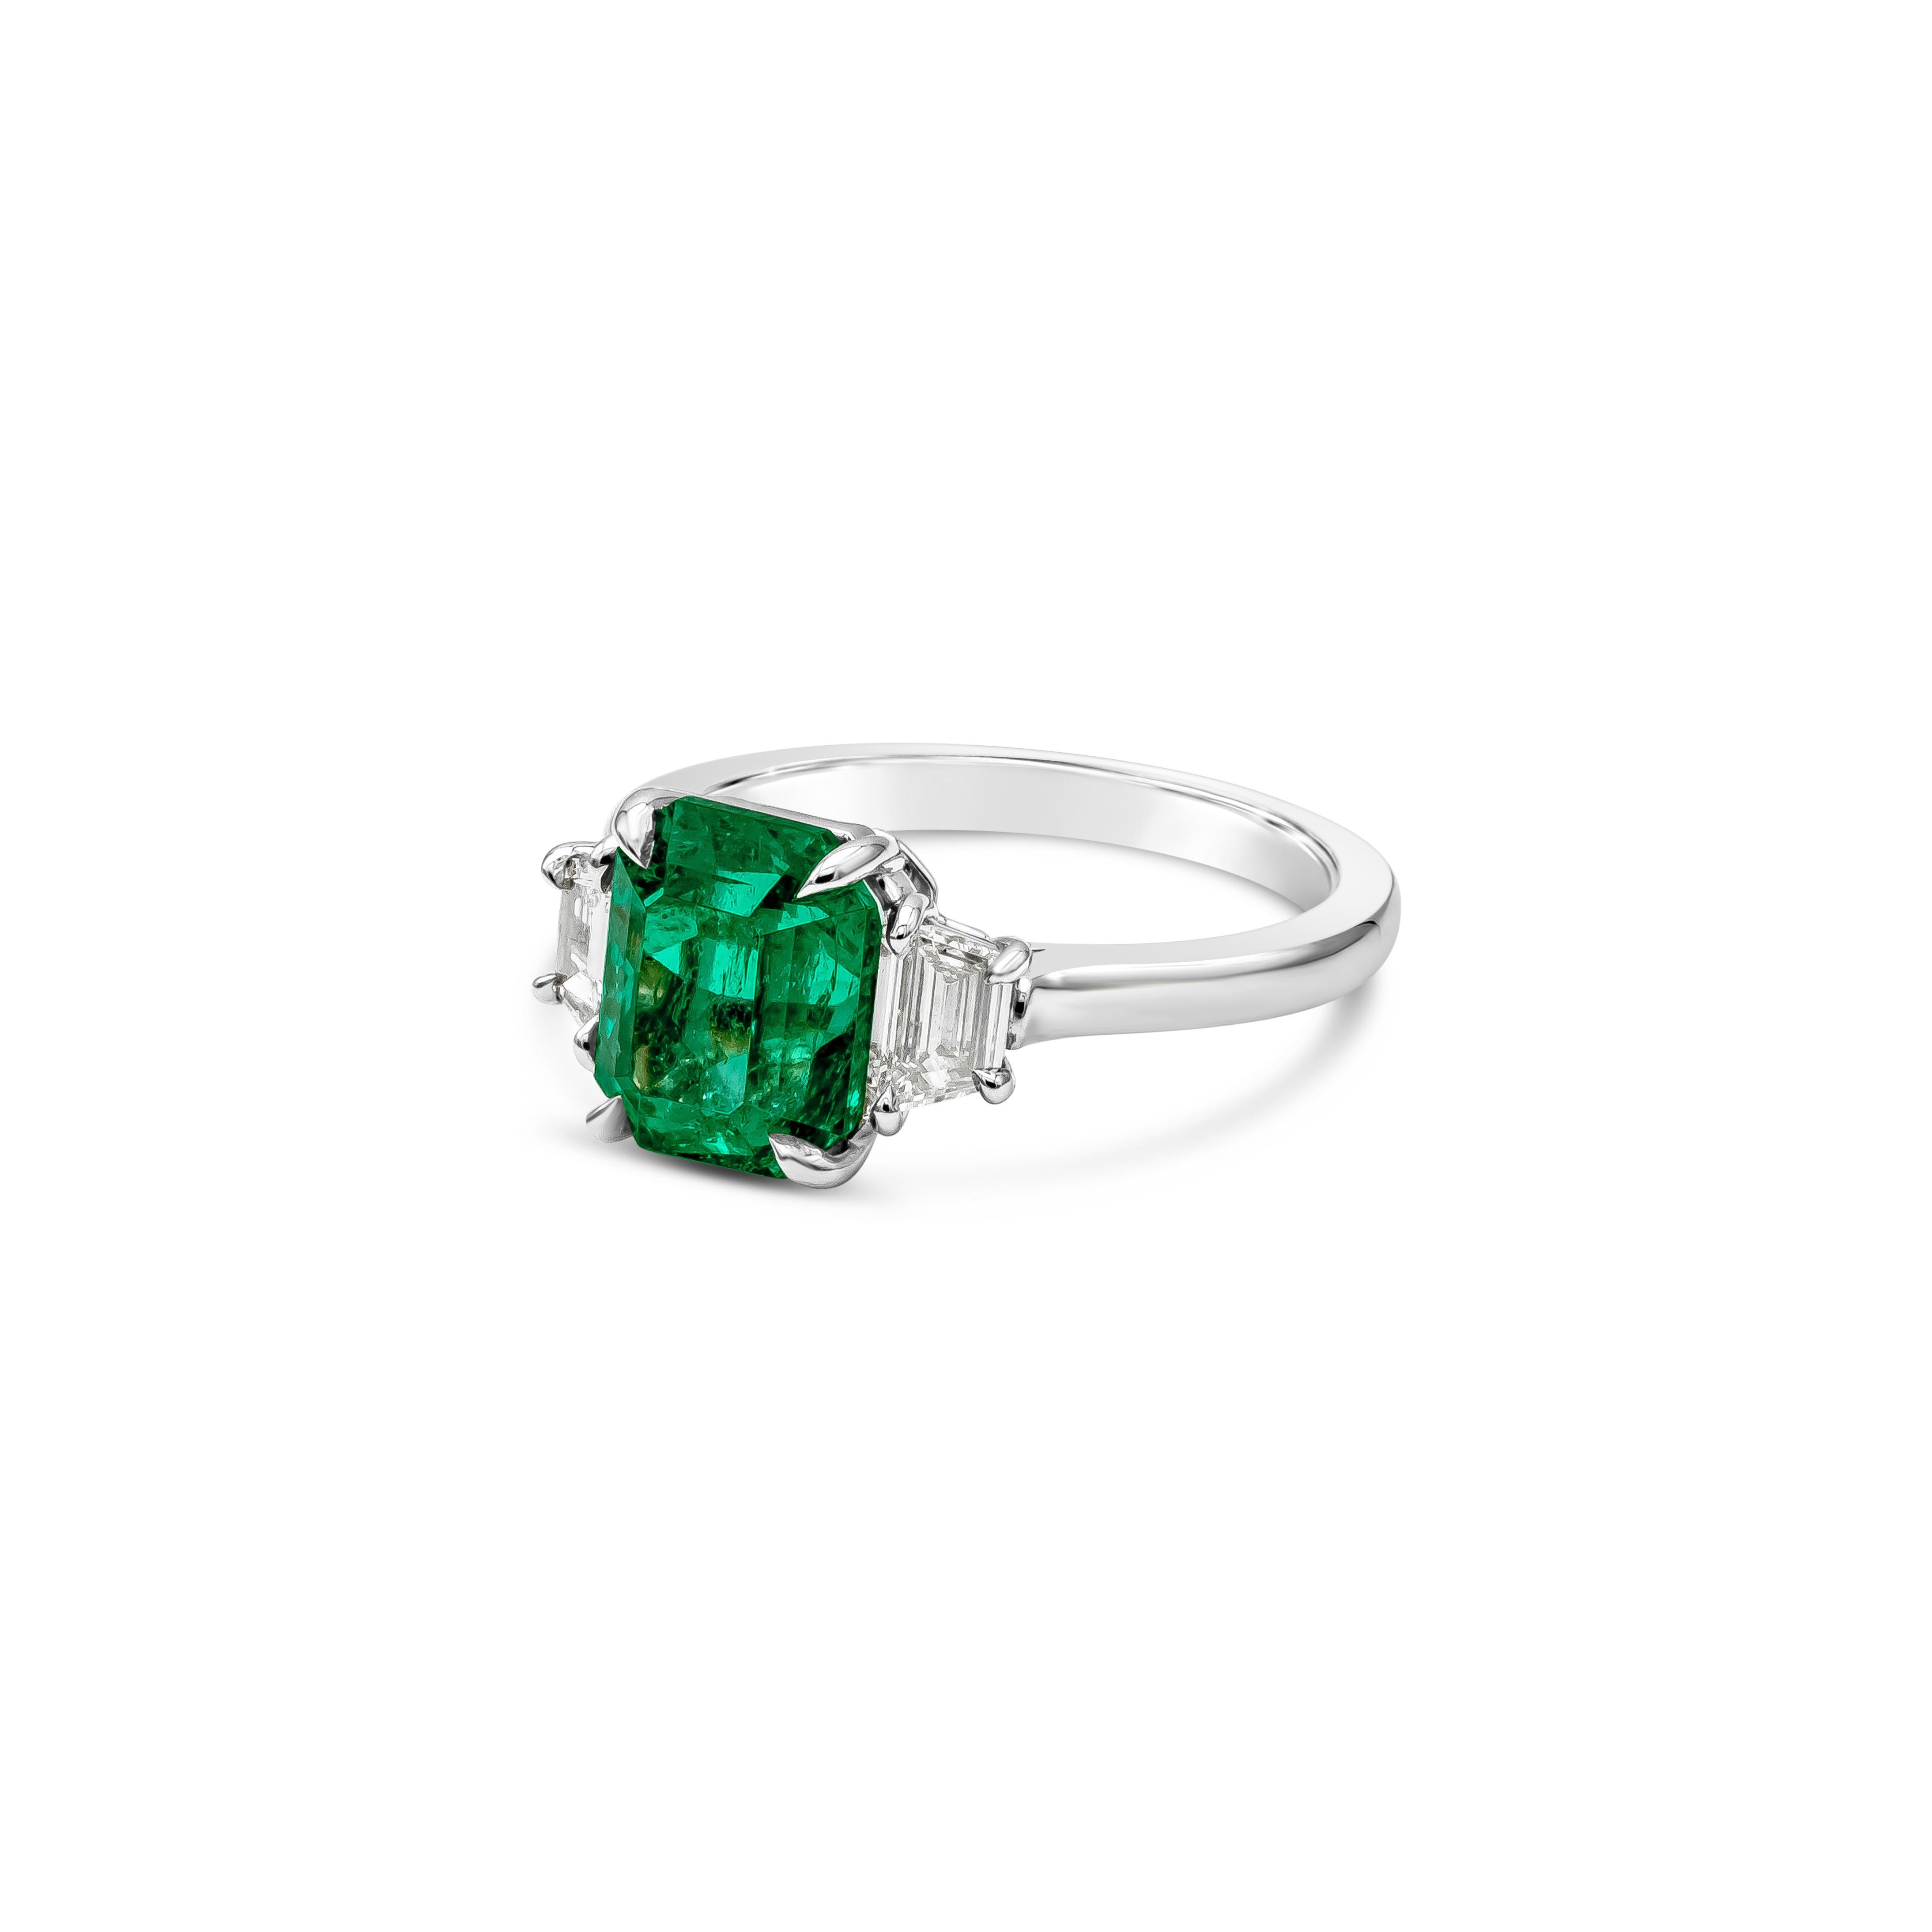 This stunning and elegant engagement ring showcasing a AGL certified color-rich radiant cut green emerald center stone weighing 2.49 carats, G color VS in clarity and set in a classic four prong basket setting. Flanked by two brilliant trapezoid